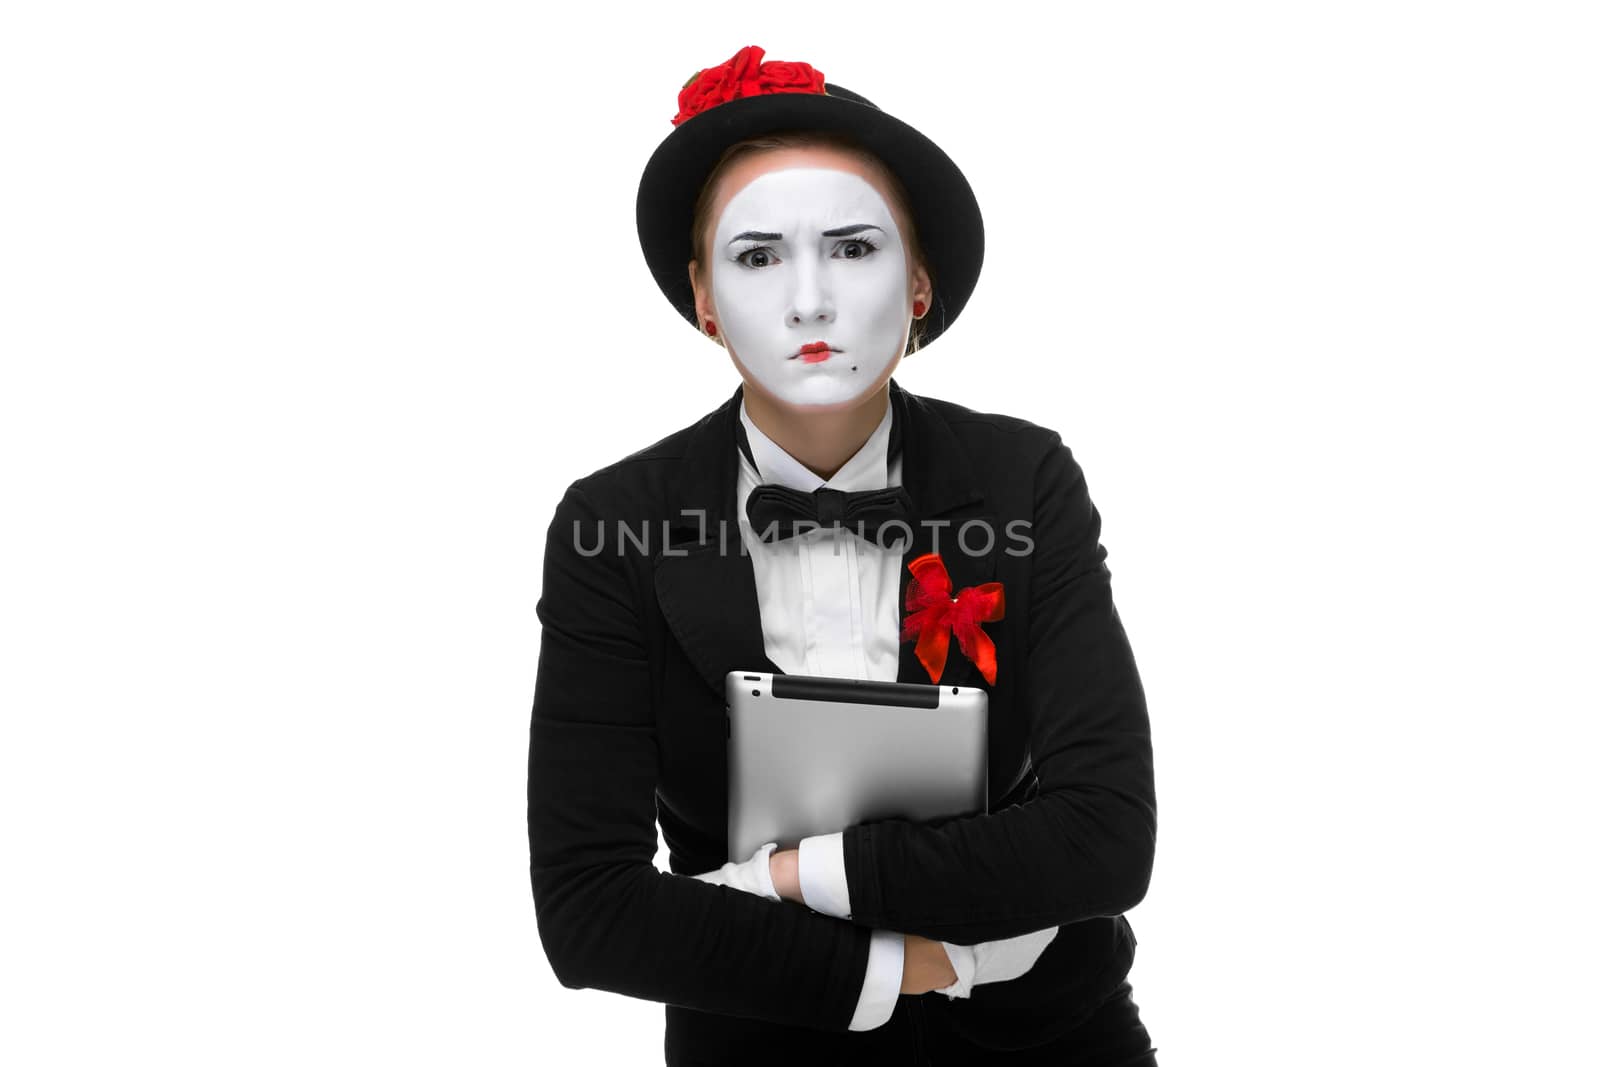 business woman in the image mime holding tablet PC and  intensely looking at the camera. isolated on white background